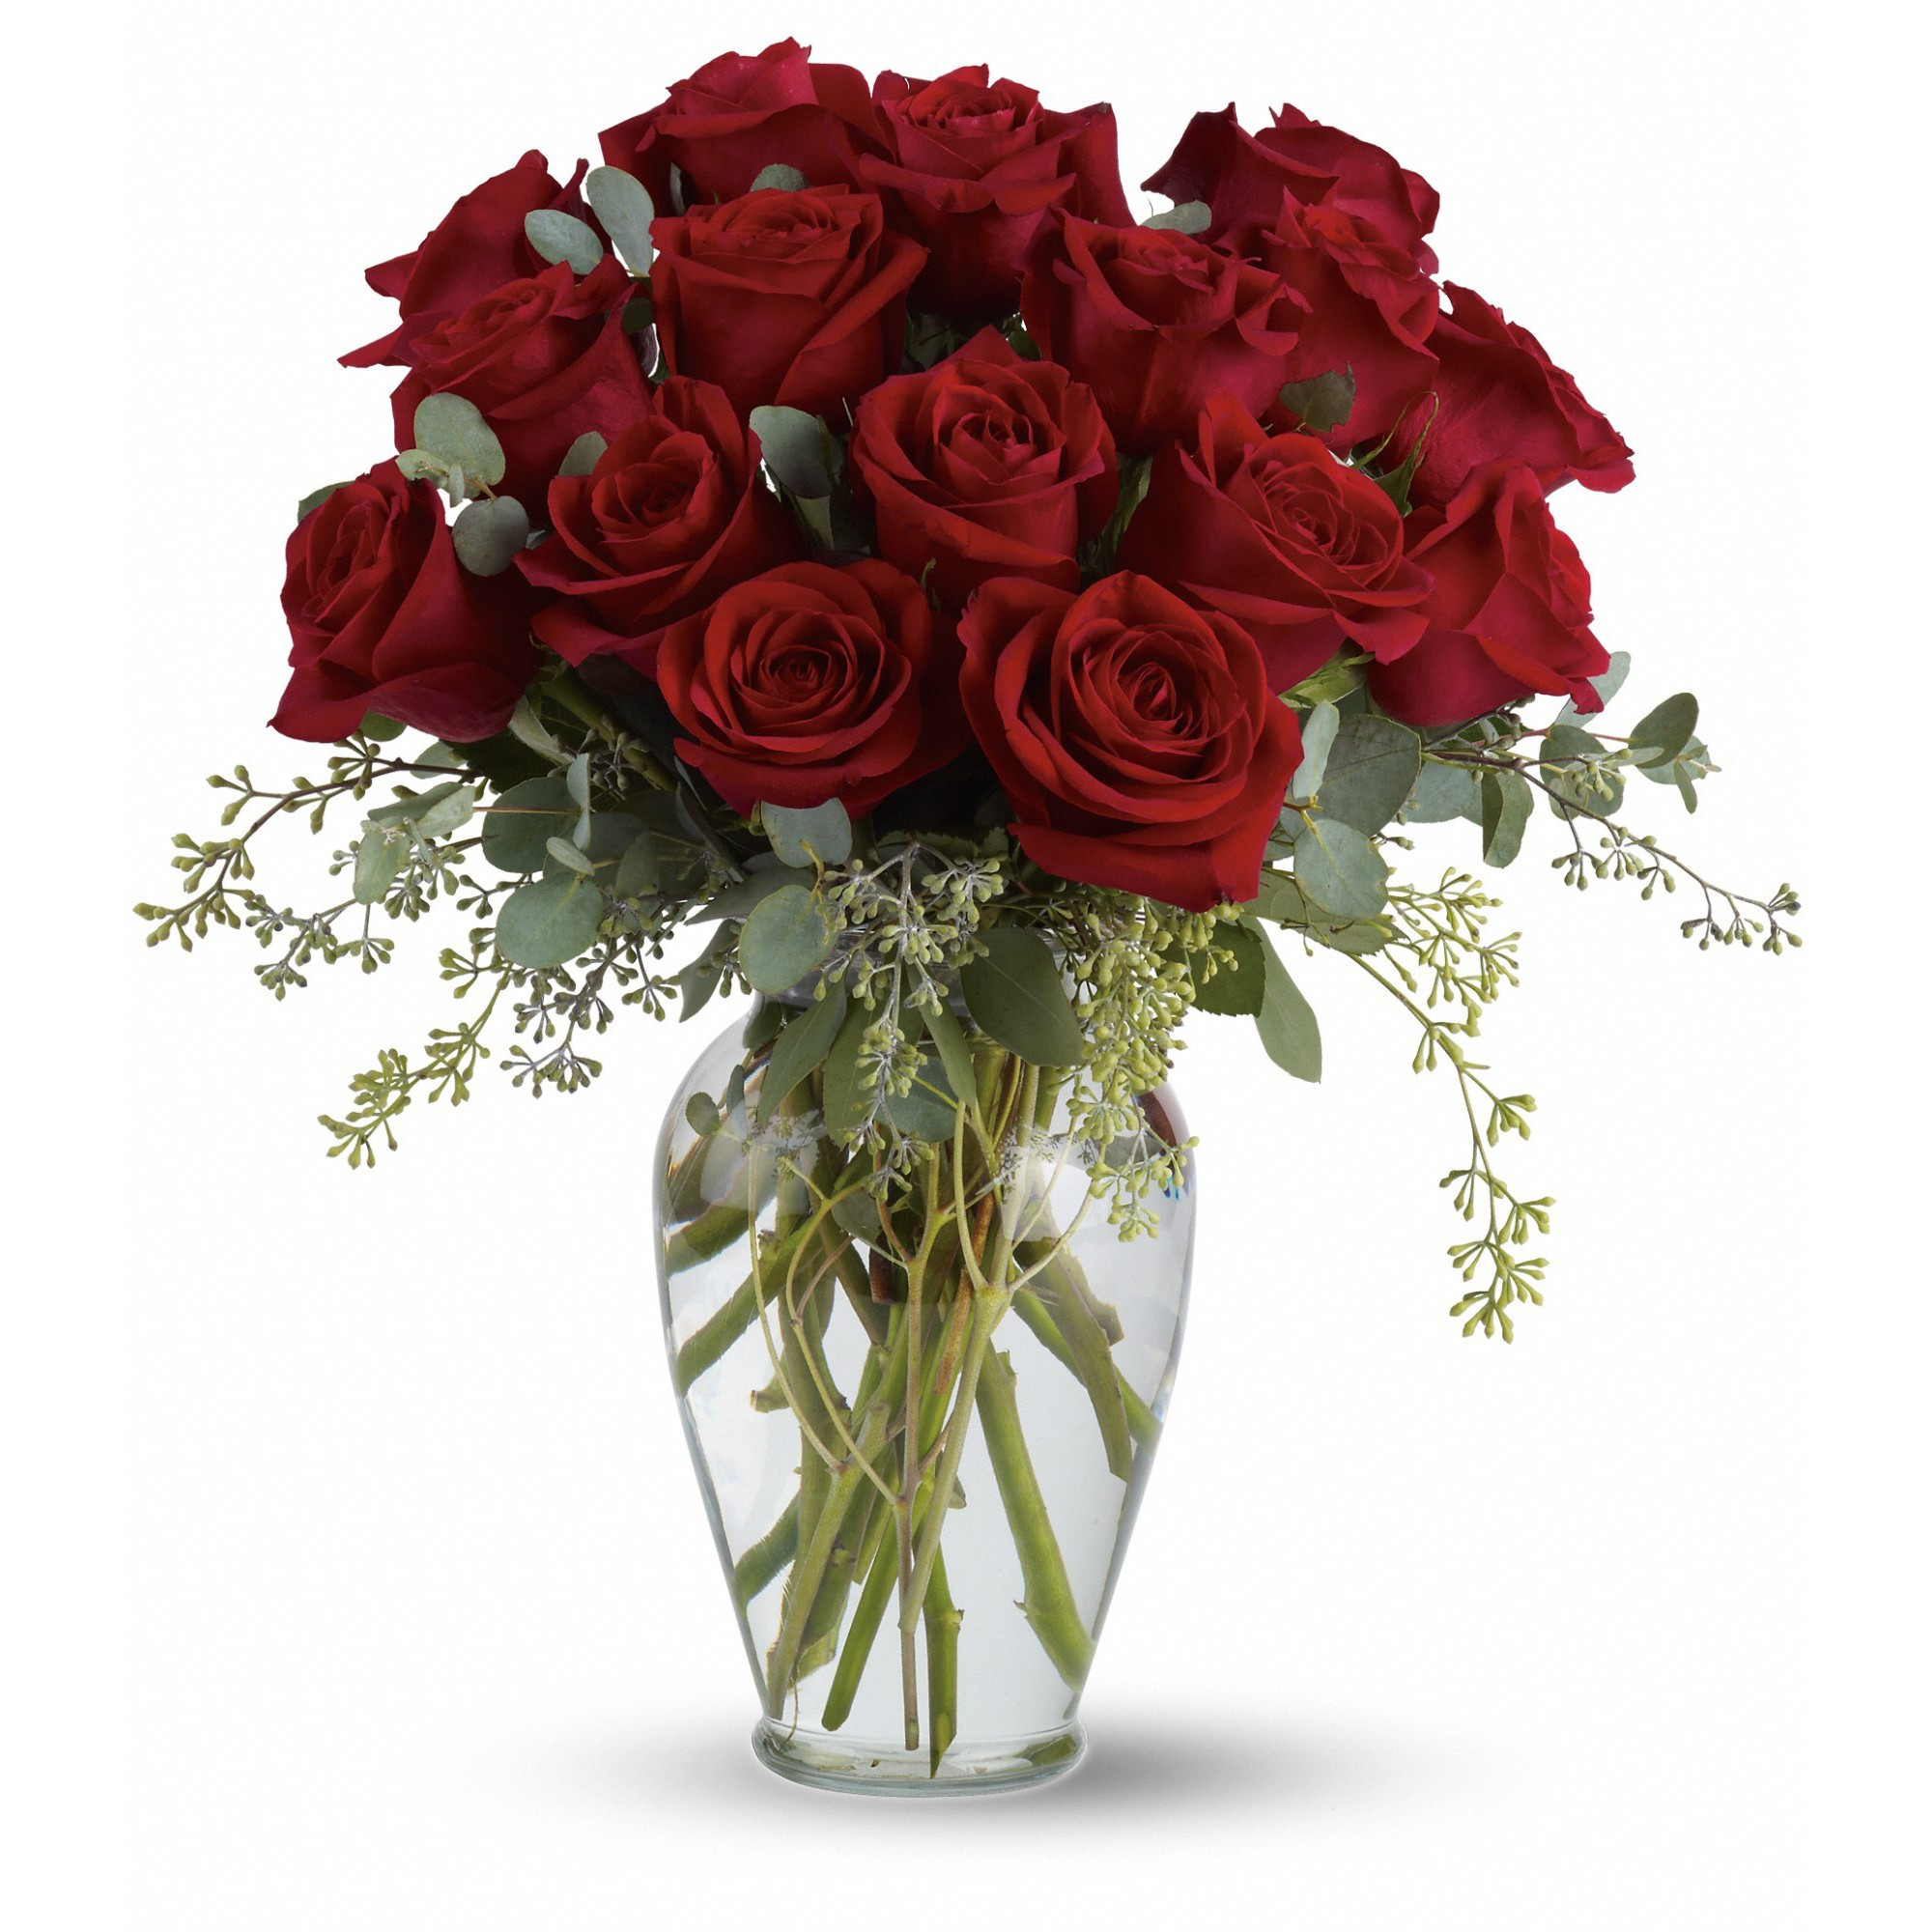 lenox rose manor vase of bronx florist flower delivery by columbia florist inc in full heart 16 premium red roses by teleflora